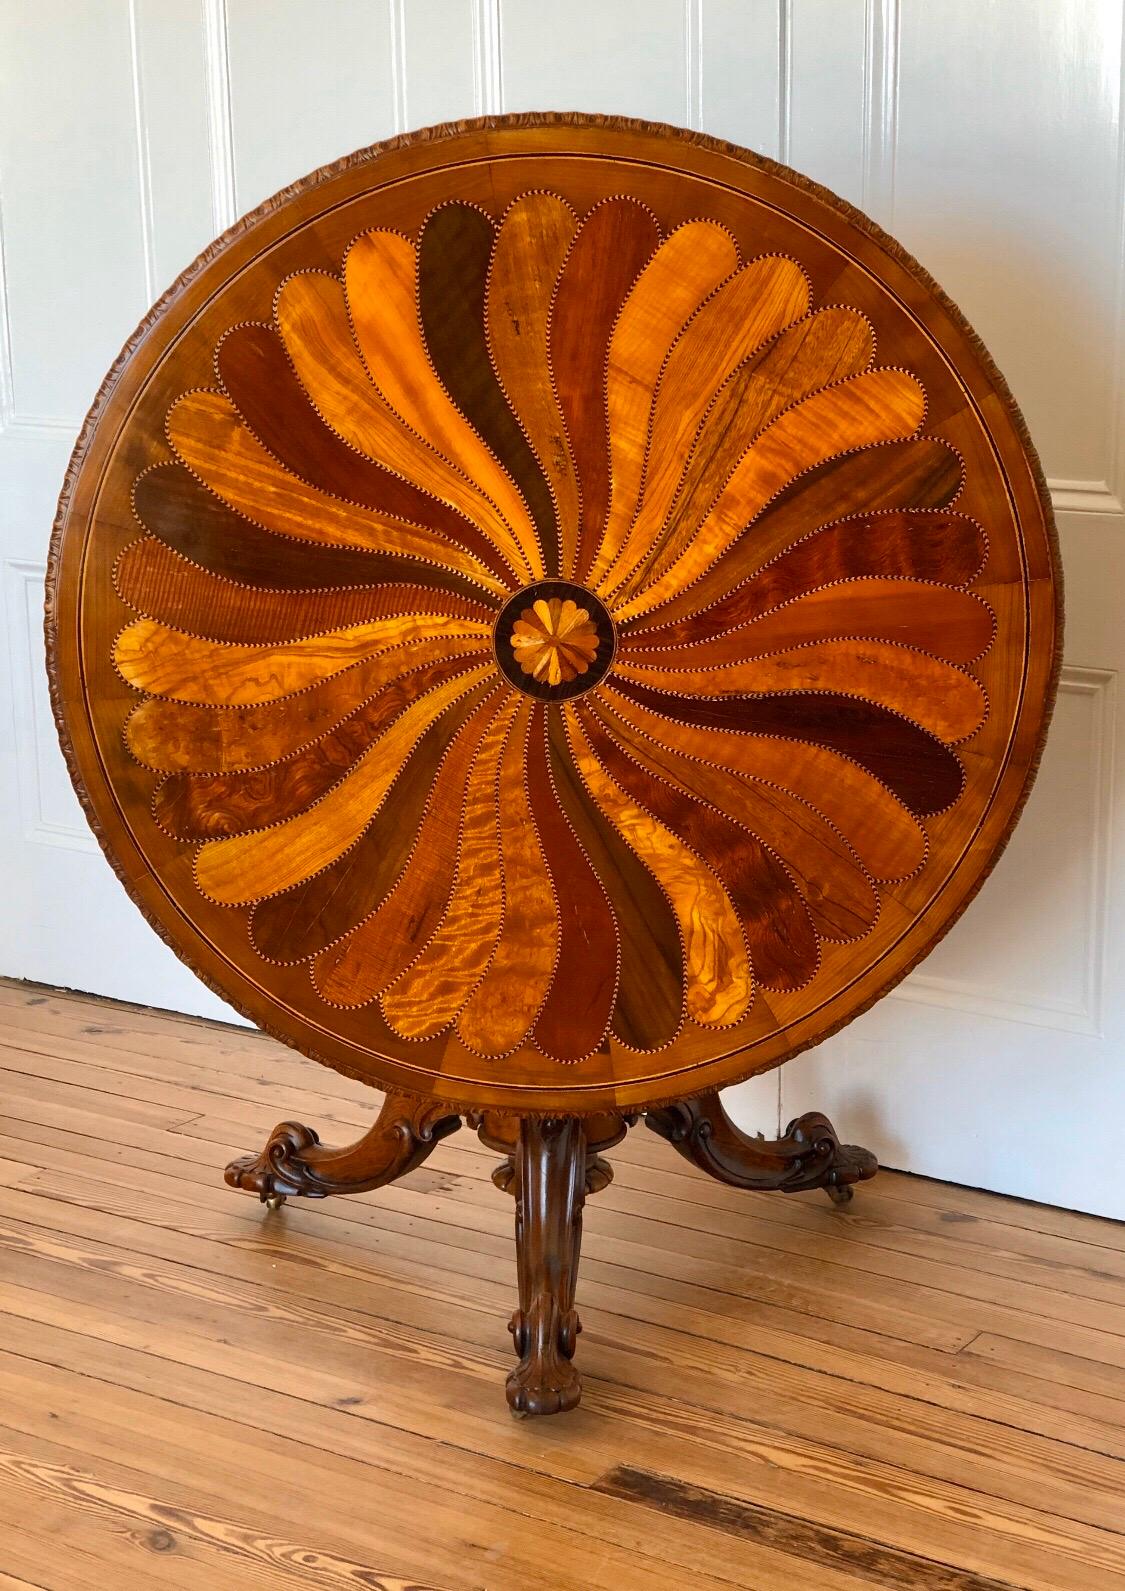 This British Colonial center table uses exotic wood veneers to create a spectacular spiral, fanning clockwise with contrasting exotic specimen woods extending from a central rosette fan compassed by an ebony band. The exotic spiral marquetry inlay